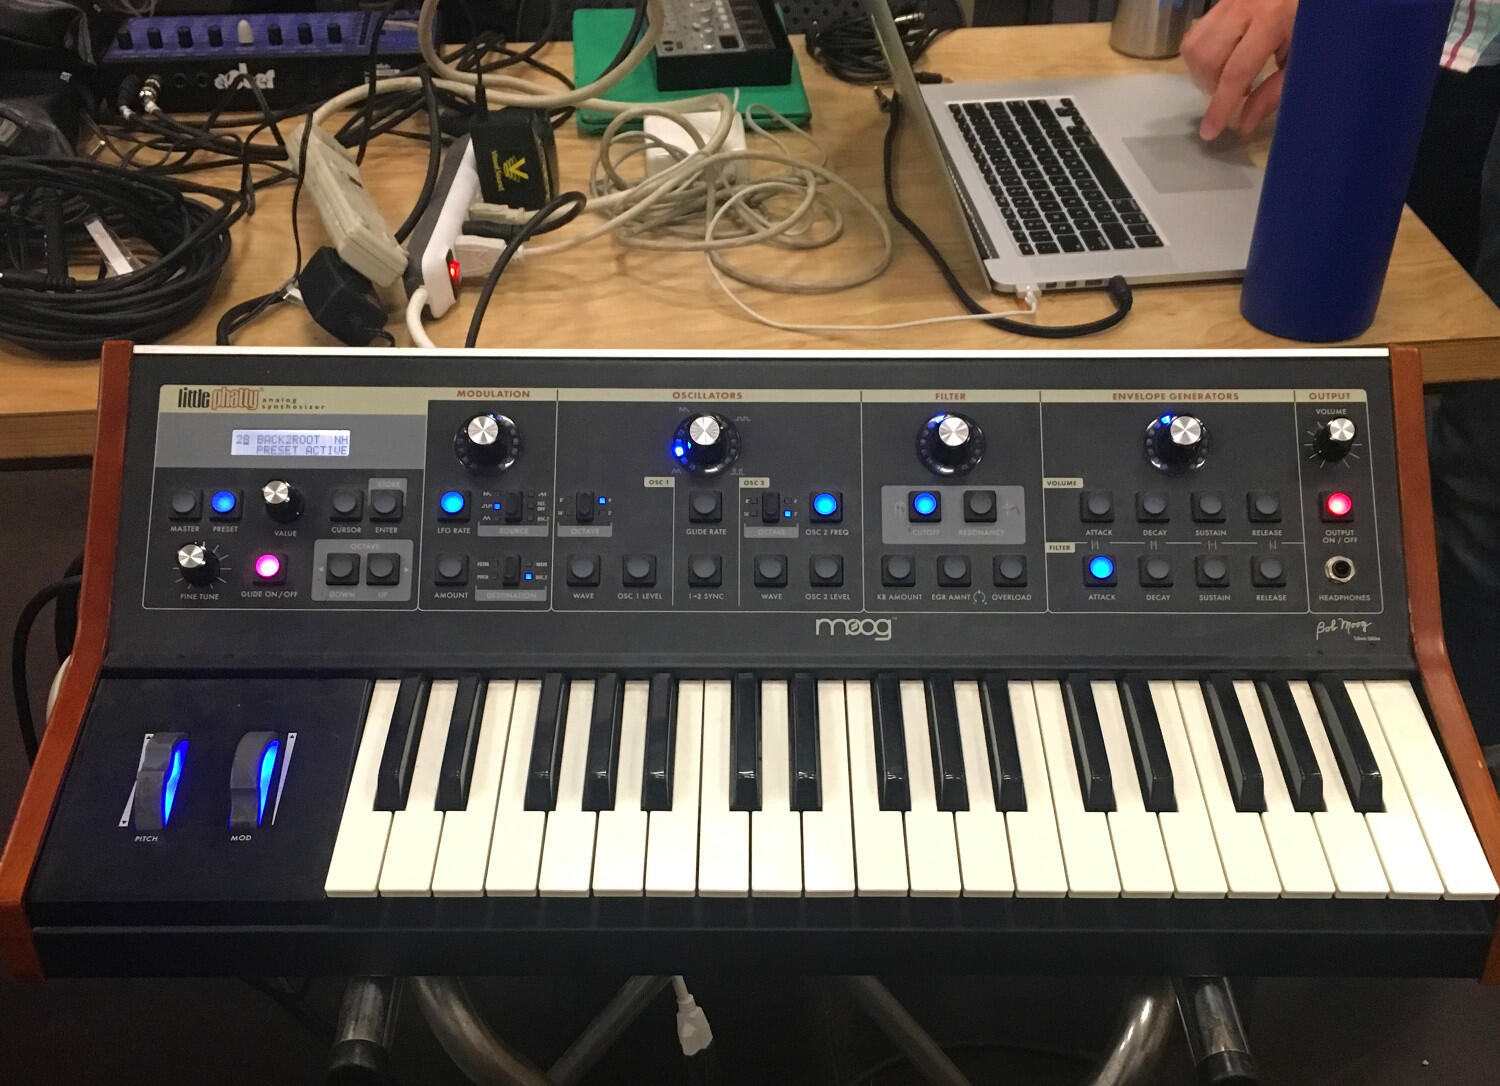 A keyboard used in the “Synthesized Sound: The Art of Beeps, Blips, and Twisting Knobs” workshop. 